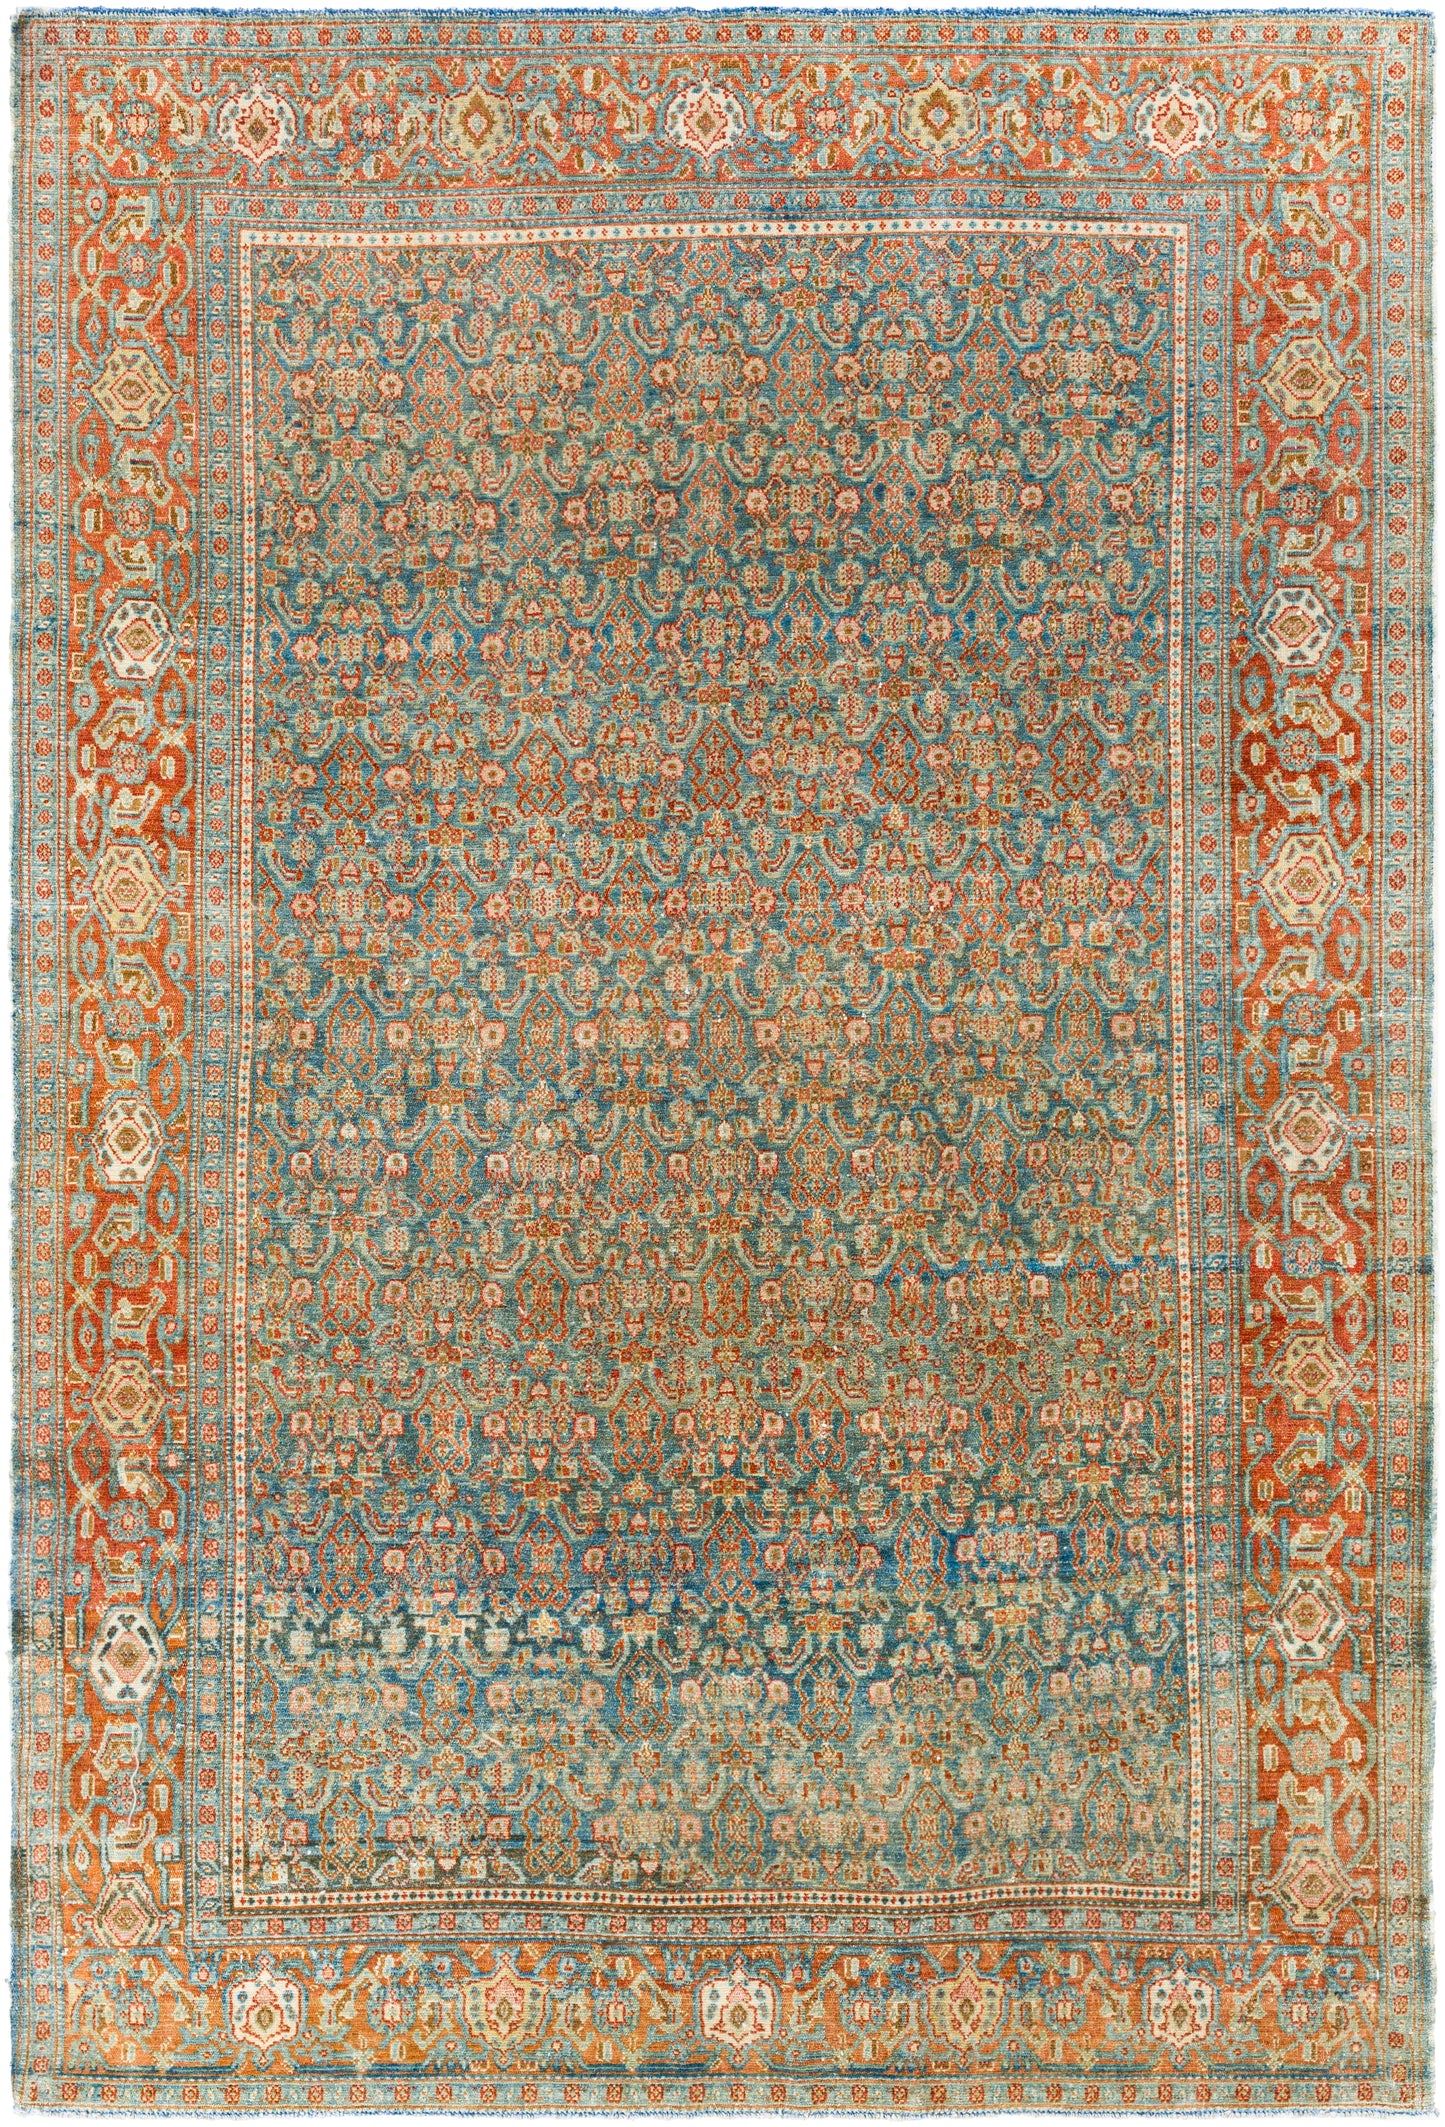 Antique One of a Kind 29807 Hand Knotted Wool Indoor Area Rug by Surya Rugs